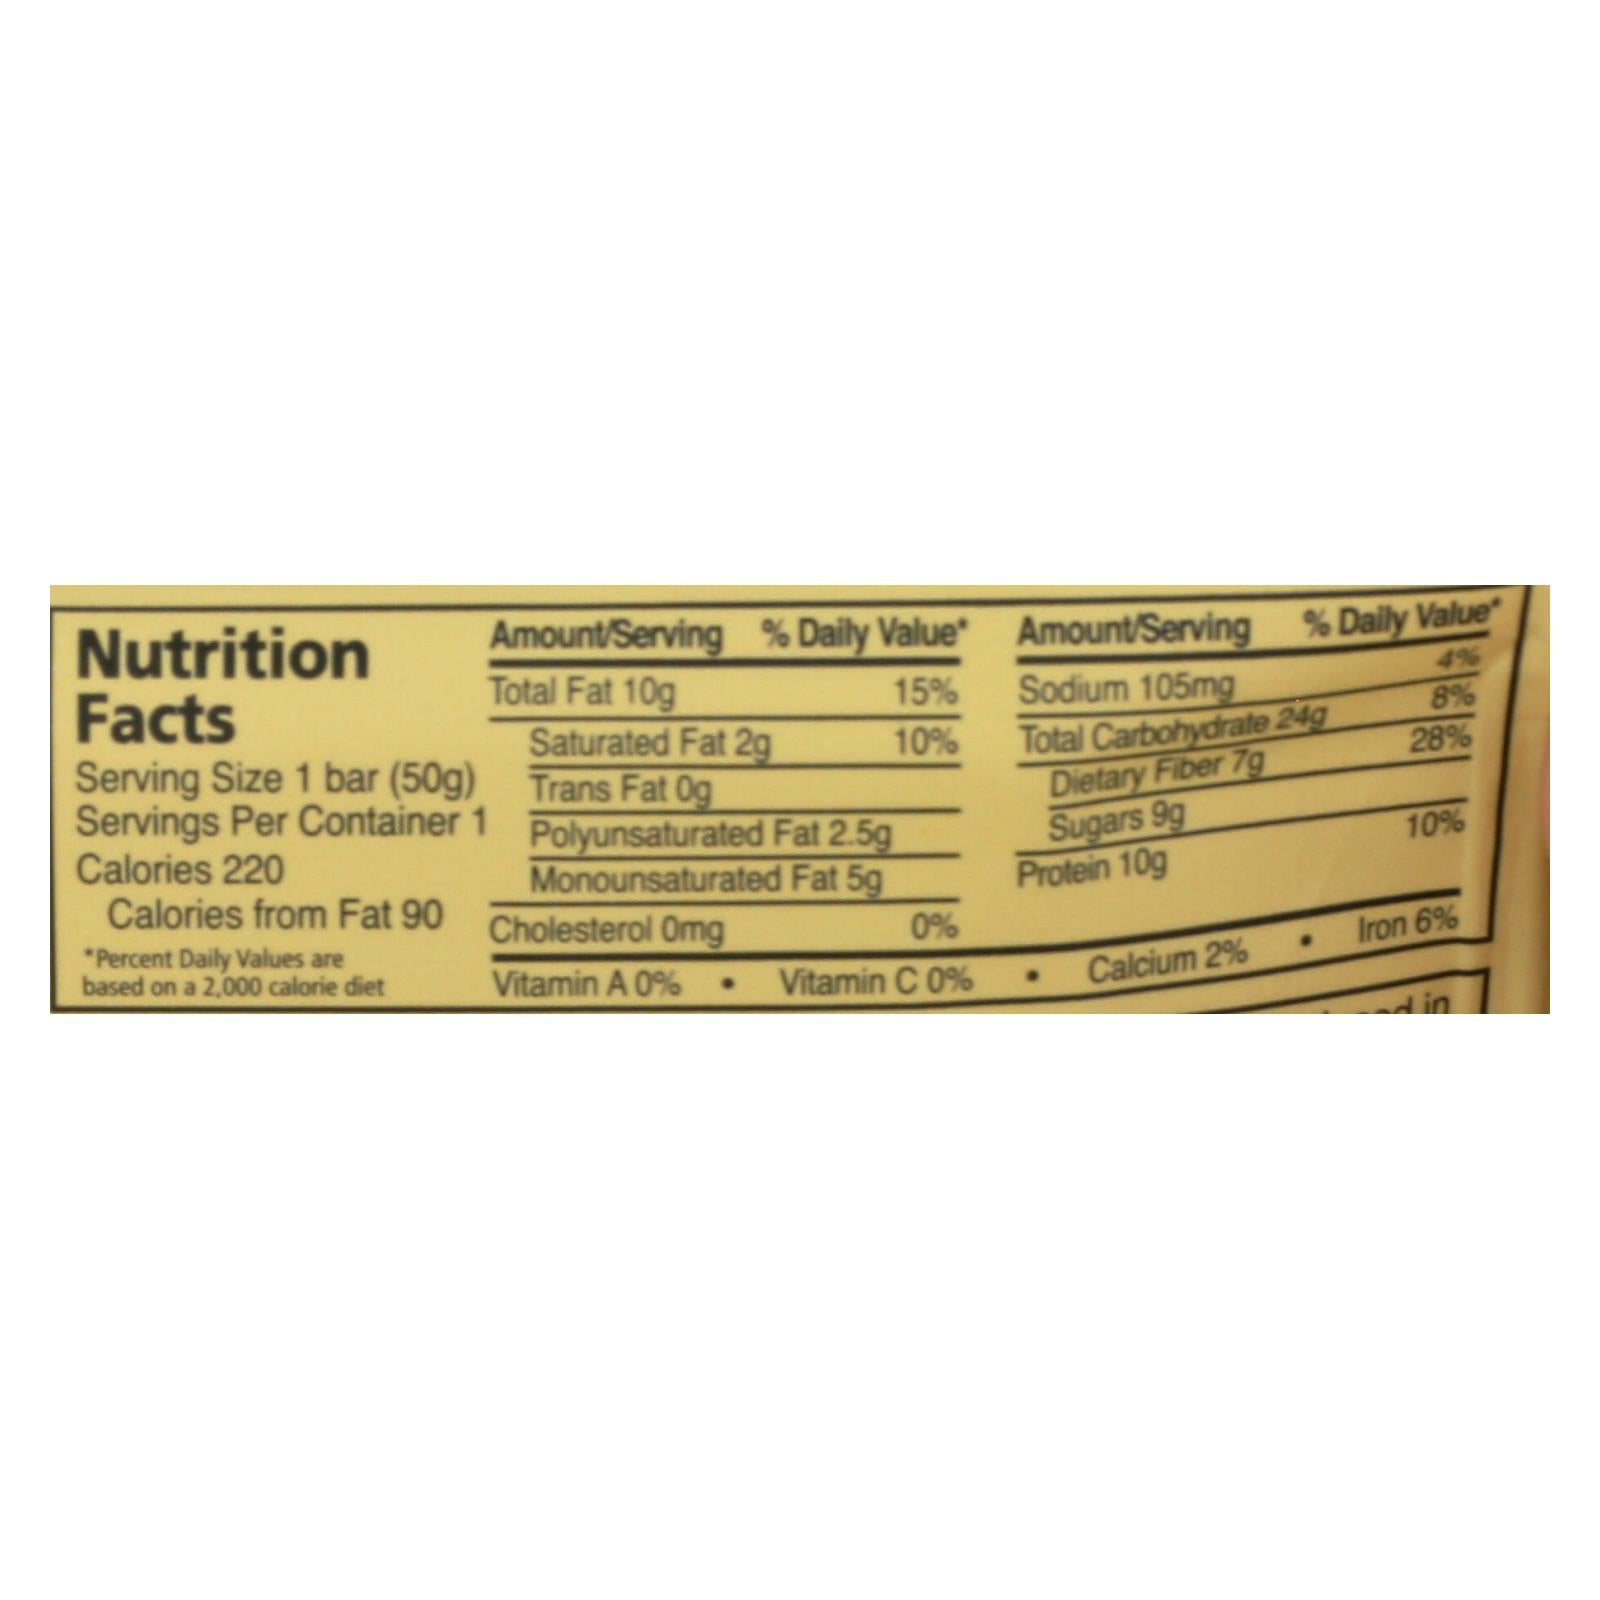 Zing Bars - Nutrition Bar - Peanut Butter Chocolate Chip - 1.76 oz Bars - Case of 12